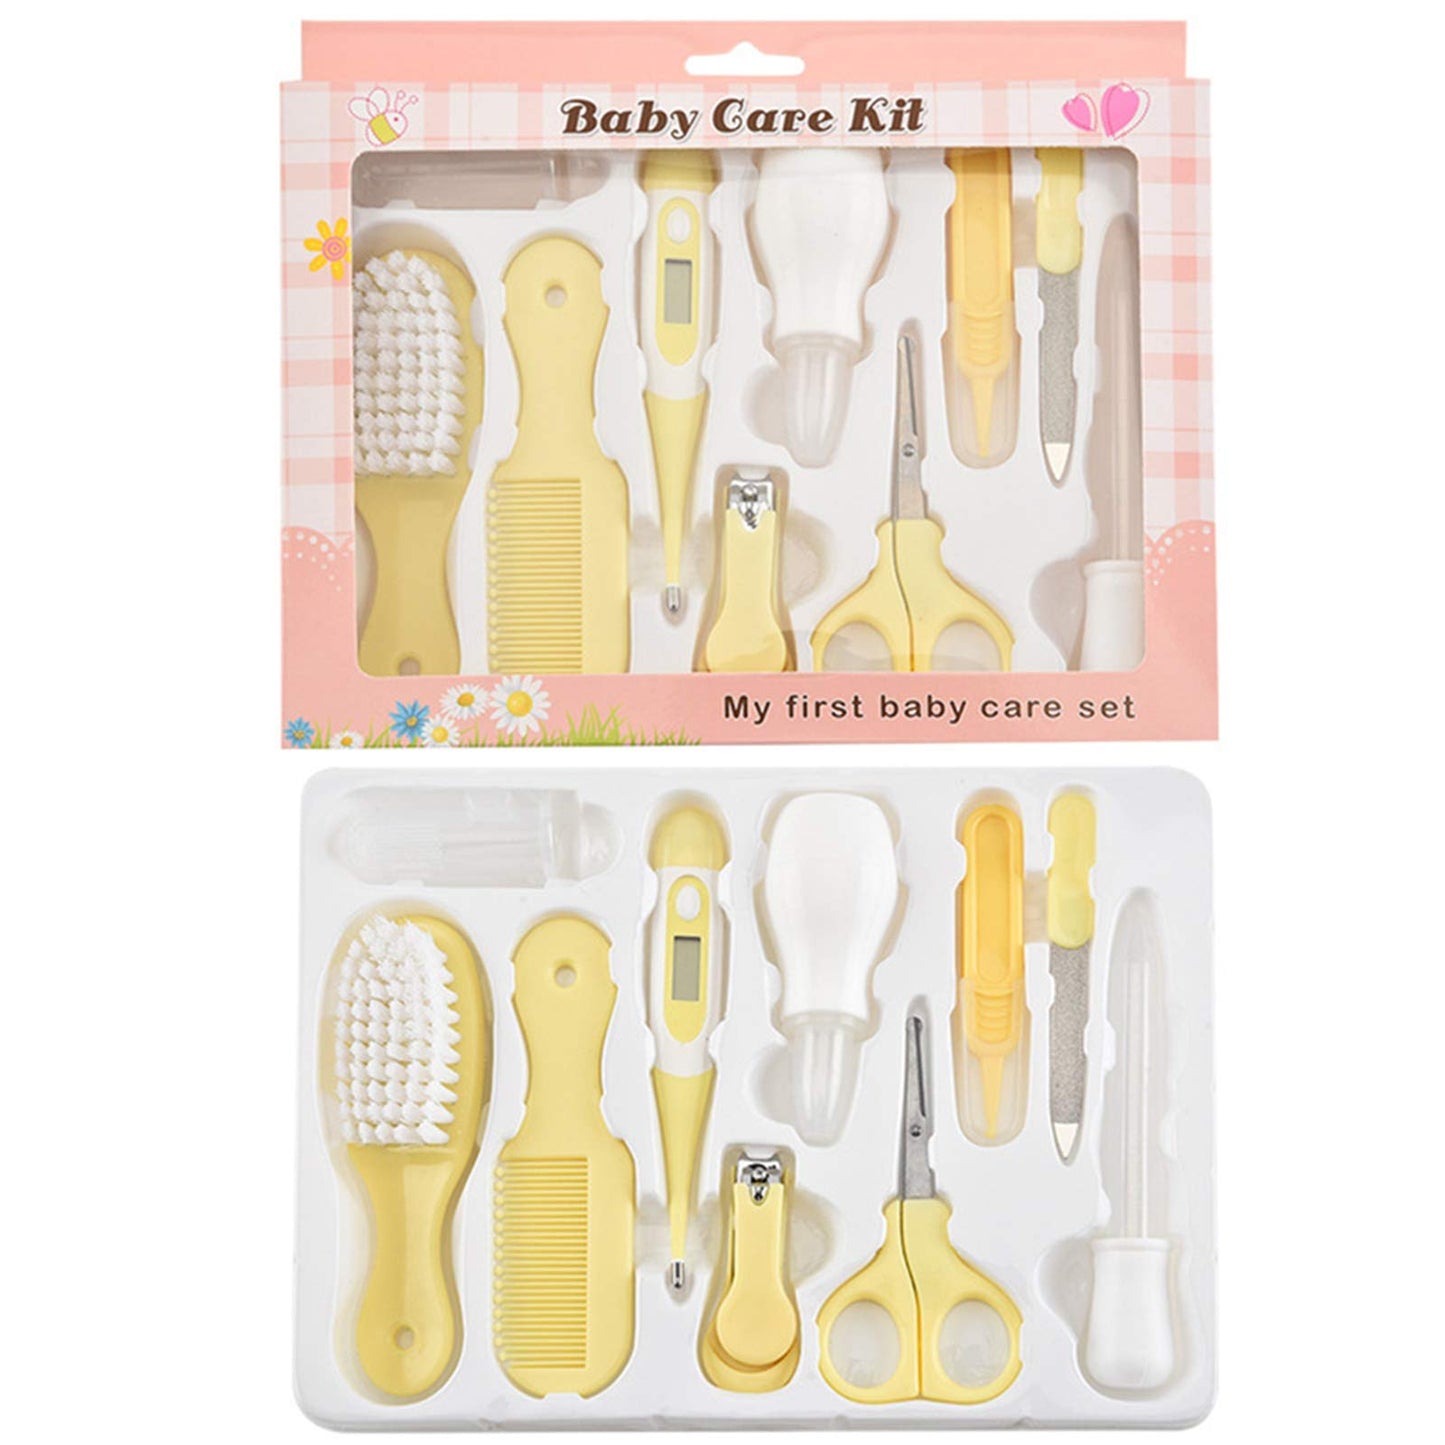 Baby Grooming Kit, Baby Care Items, Baby Care Essentials Set, Baby Supplies Set, 8PCS Baby Health Care Set Portable Baby Care Kit, Safety Cutter Baby Nail Kit for Newborn, Infant & Toddler(Yellow)